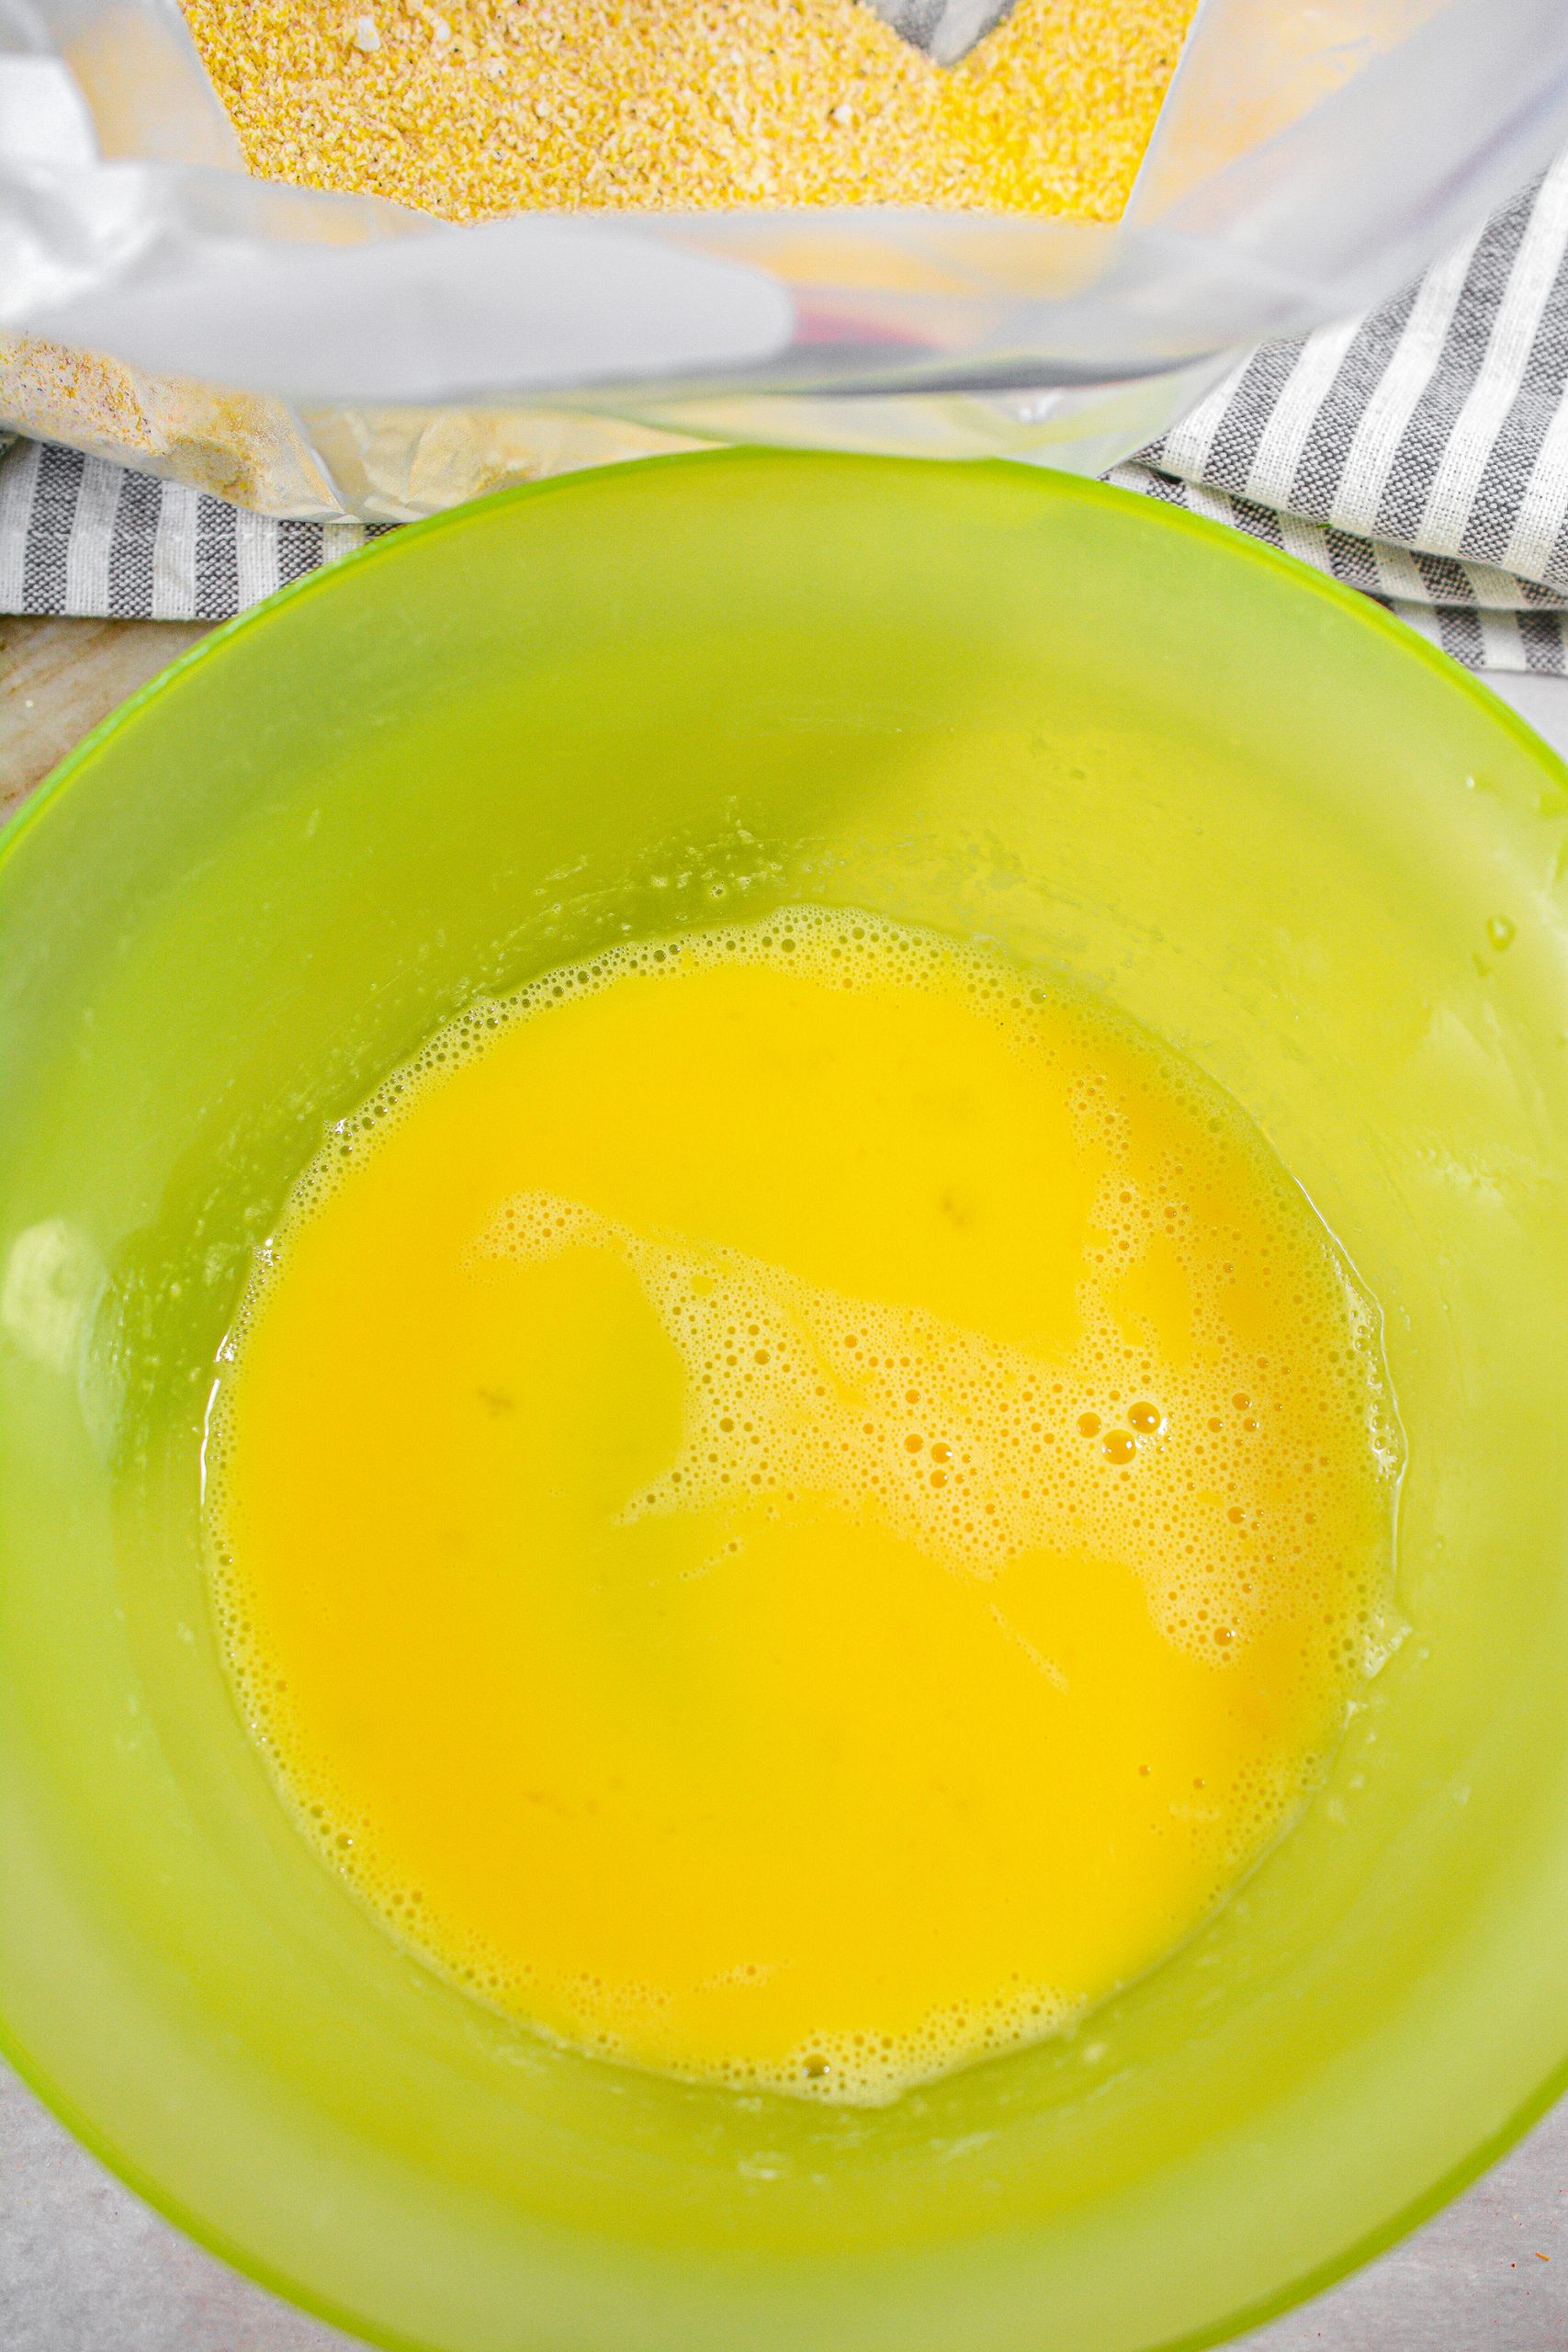 Whisk together the eggs in a large bowl.